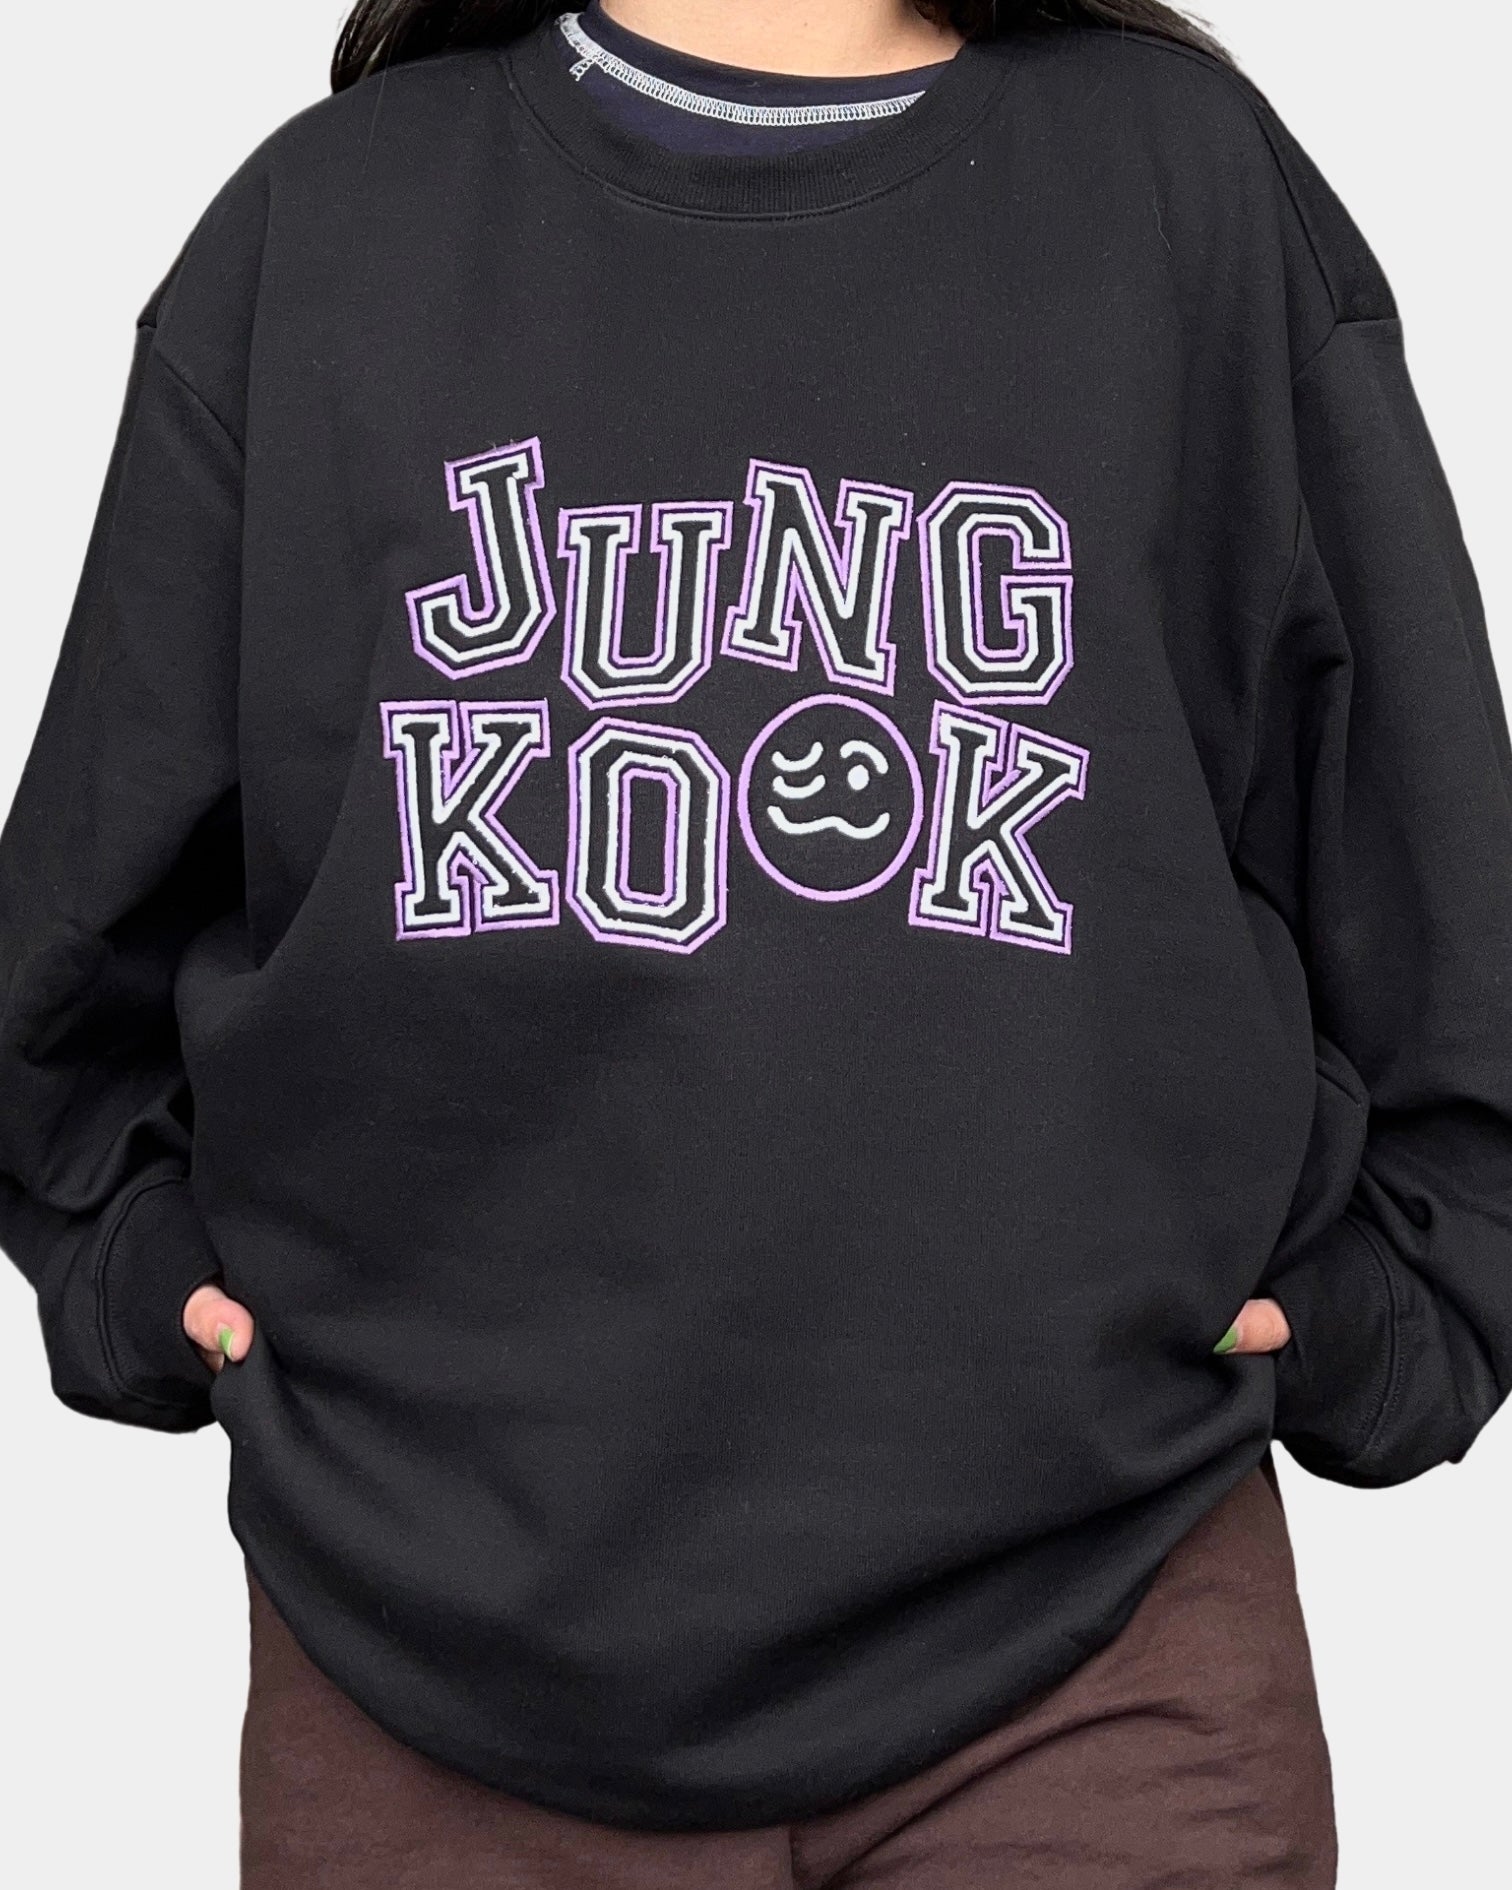 JEON JUNGKOOK EMBROIDERED SWEATSHIRT (UP TO 4 WEEKS PROCESSING)